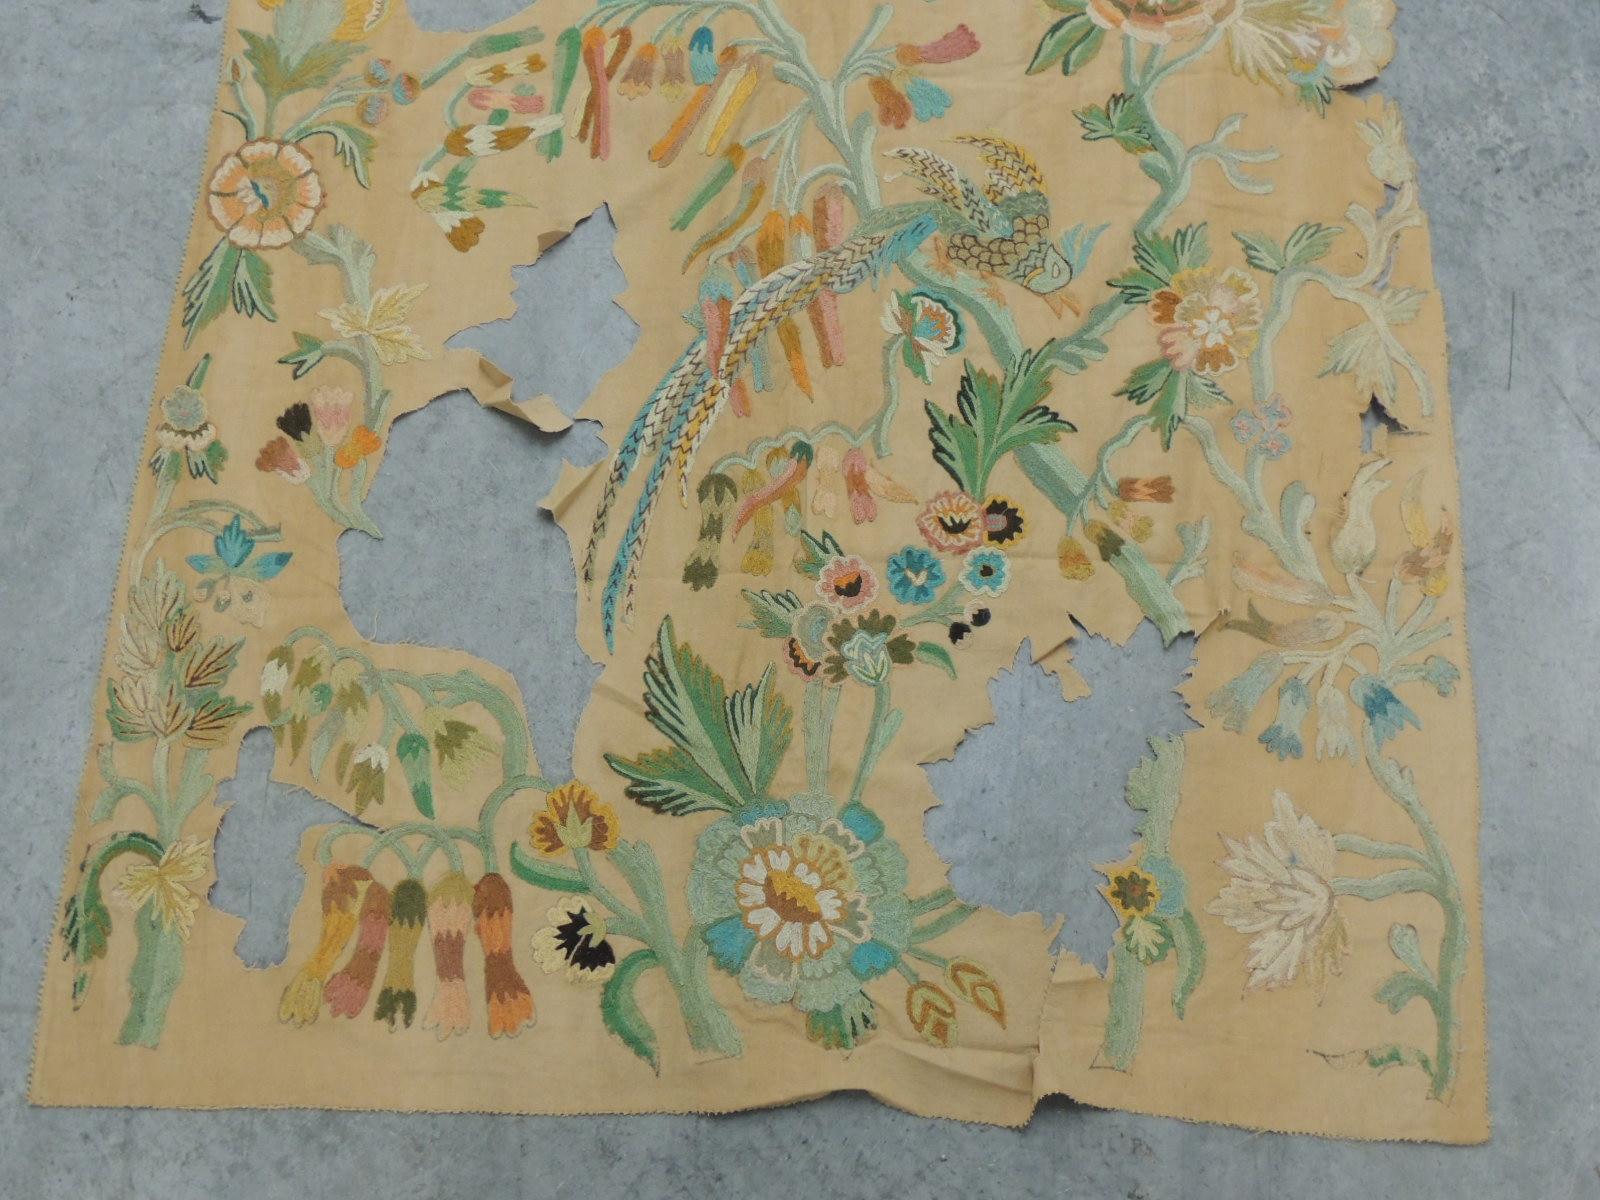 Large crewel work/crewelwork tree of life panel
Depicting birds of paradise and flowers
(sold as is)
In shades of green, yellow, pink, orange, teal, aqua, tan, brown and natural.
Ideal for pillows or upholstery.
Size: 47